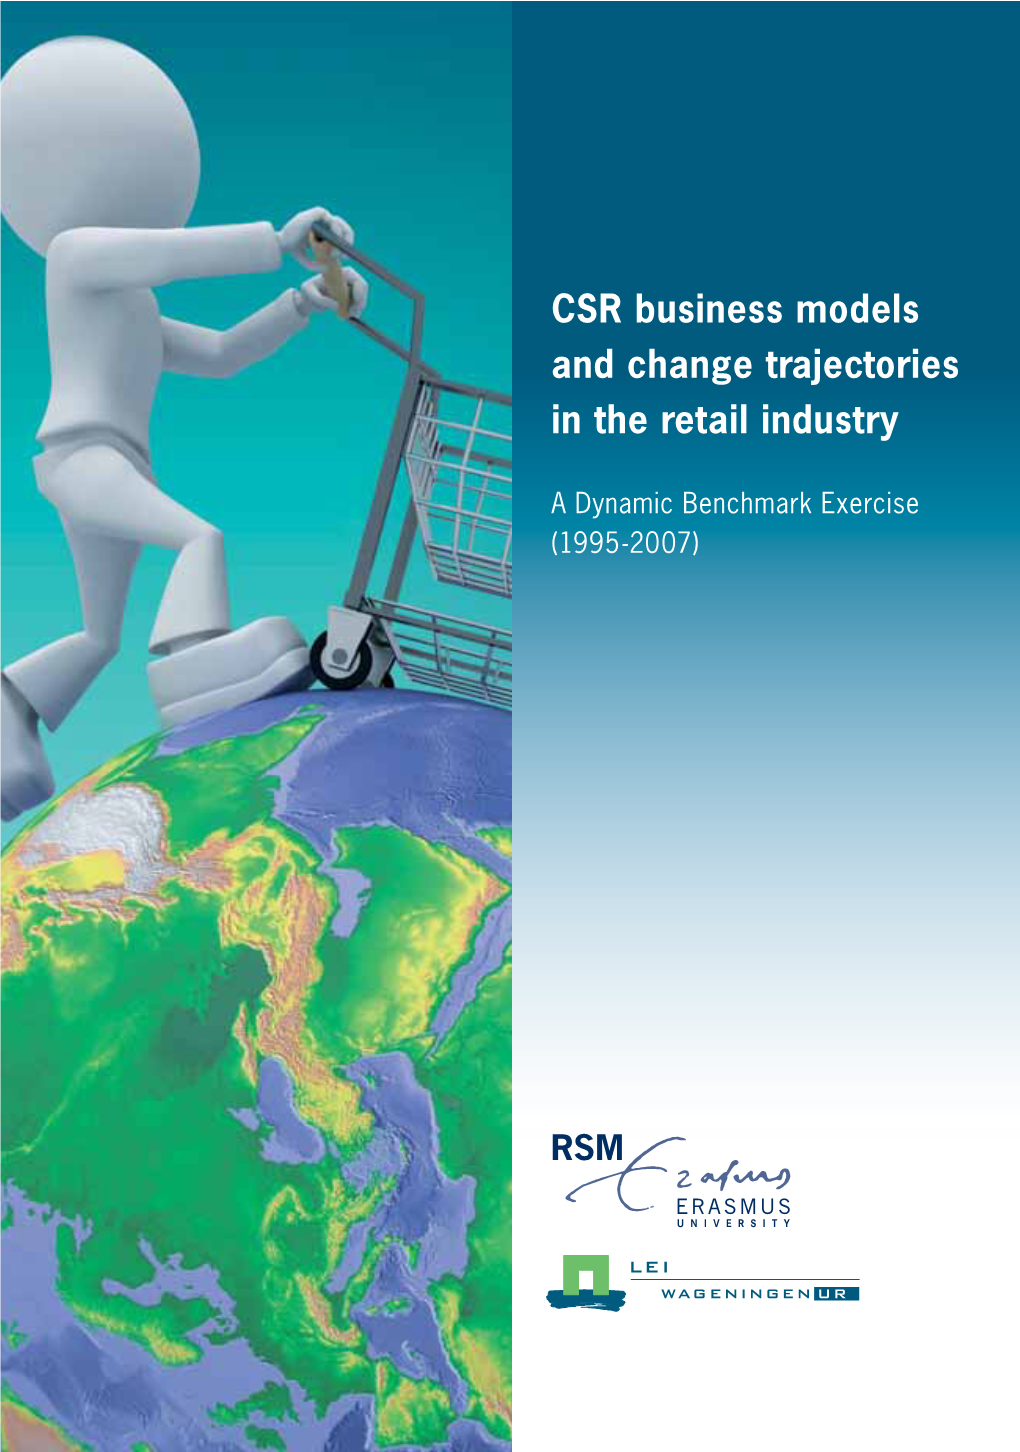 CSR Business Models and Change Trajectories in the Retail Industry